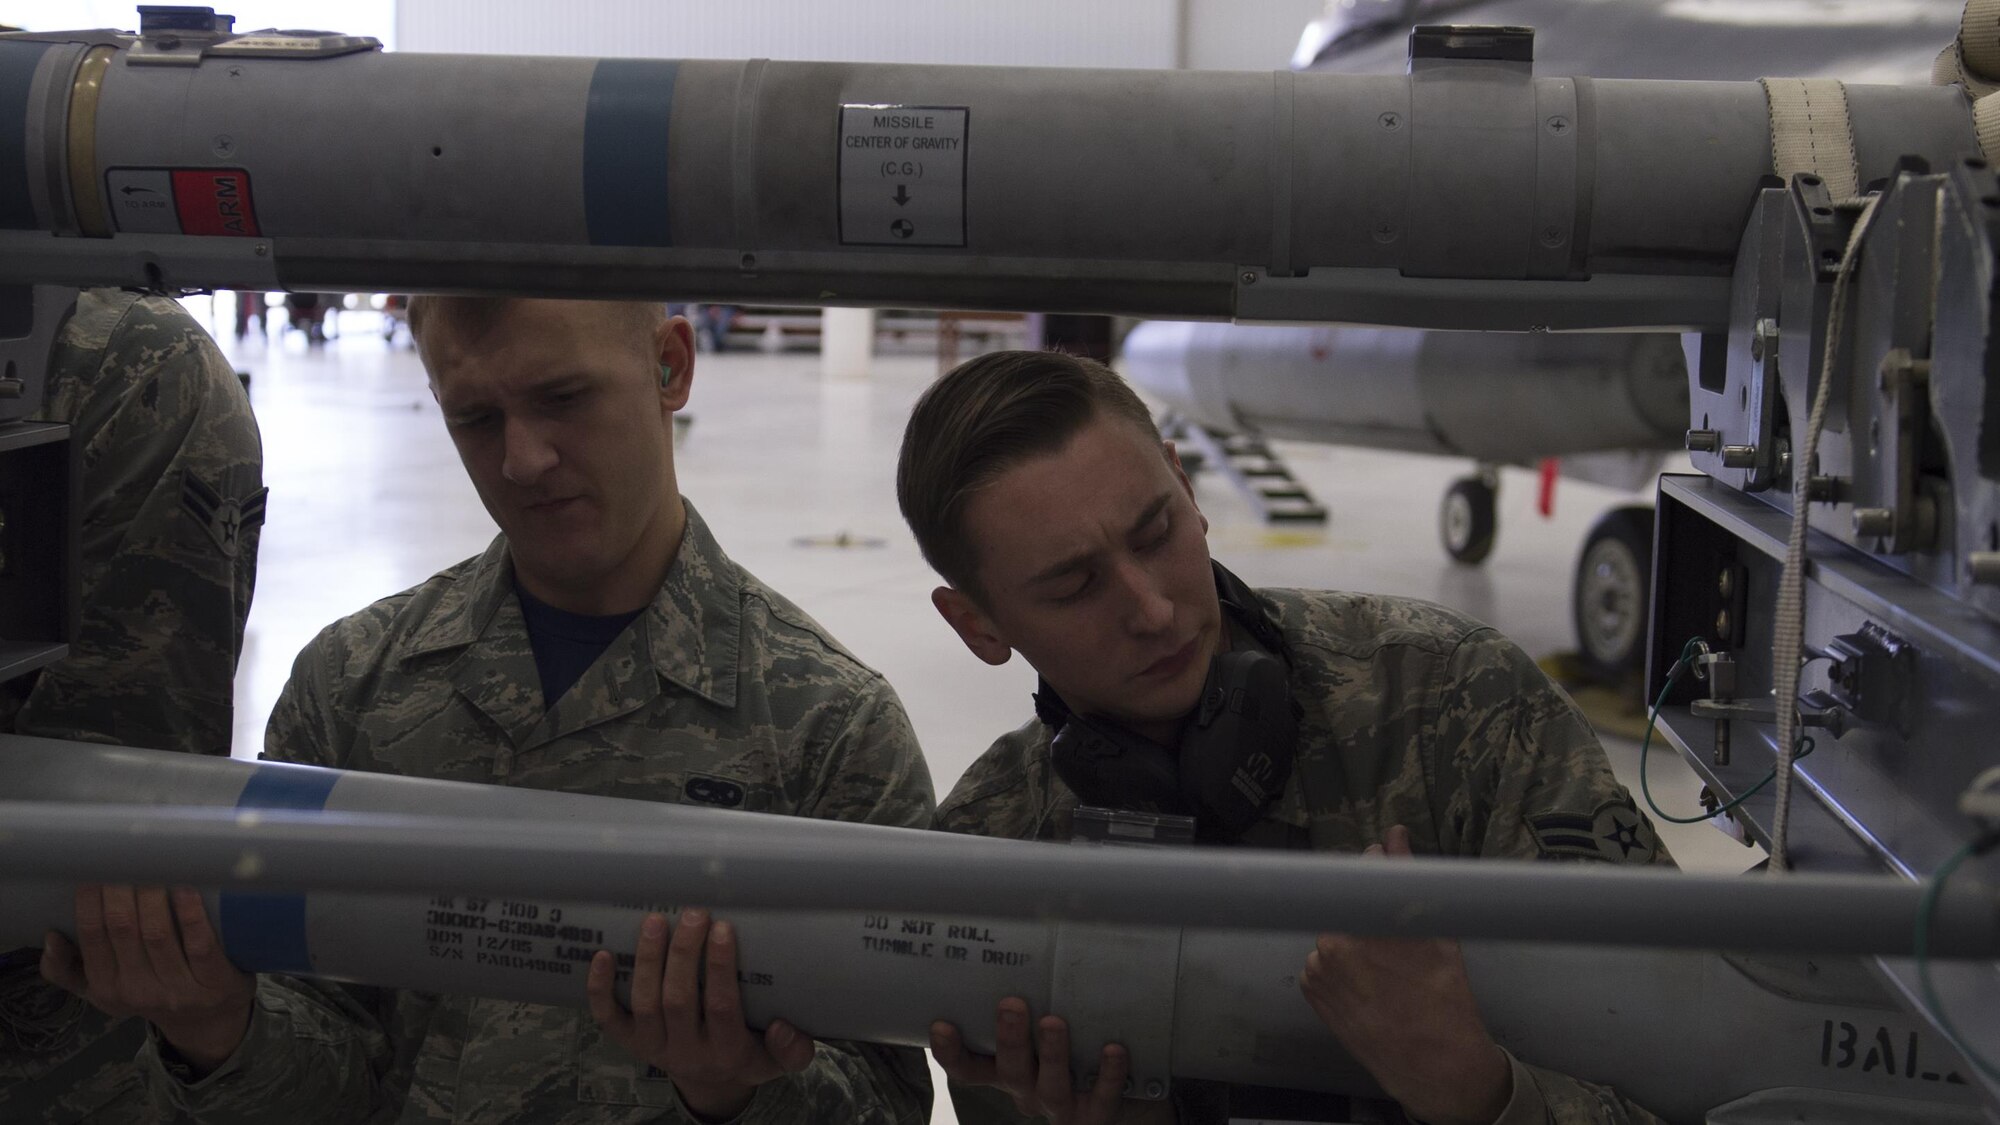 Members of the 54th Fighter Group load crew prepare to load an inert munition onto an F-16 Fighting Falcon during a quarterly load crew competition at Holloman Air Force Base, N.M., Jan. 20, 2016. The weapons load crews for German Air Force Tornado, F-16 Fighting Falcon and MQ-9 Reaper competed against each other to load weapons the most efficiently and with the least amount of procedural errors. Points for the competition are awarded based on weapons loading, tool kit inspection and uniform inspection categories. (U.S. Air Force photo by Senior Airman Chase Cannon/ Released)